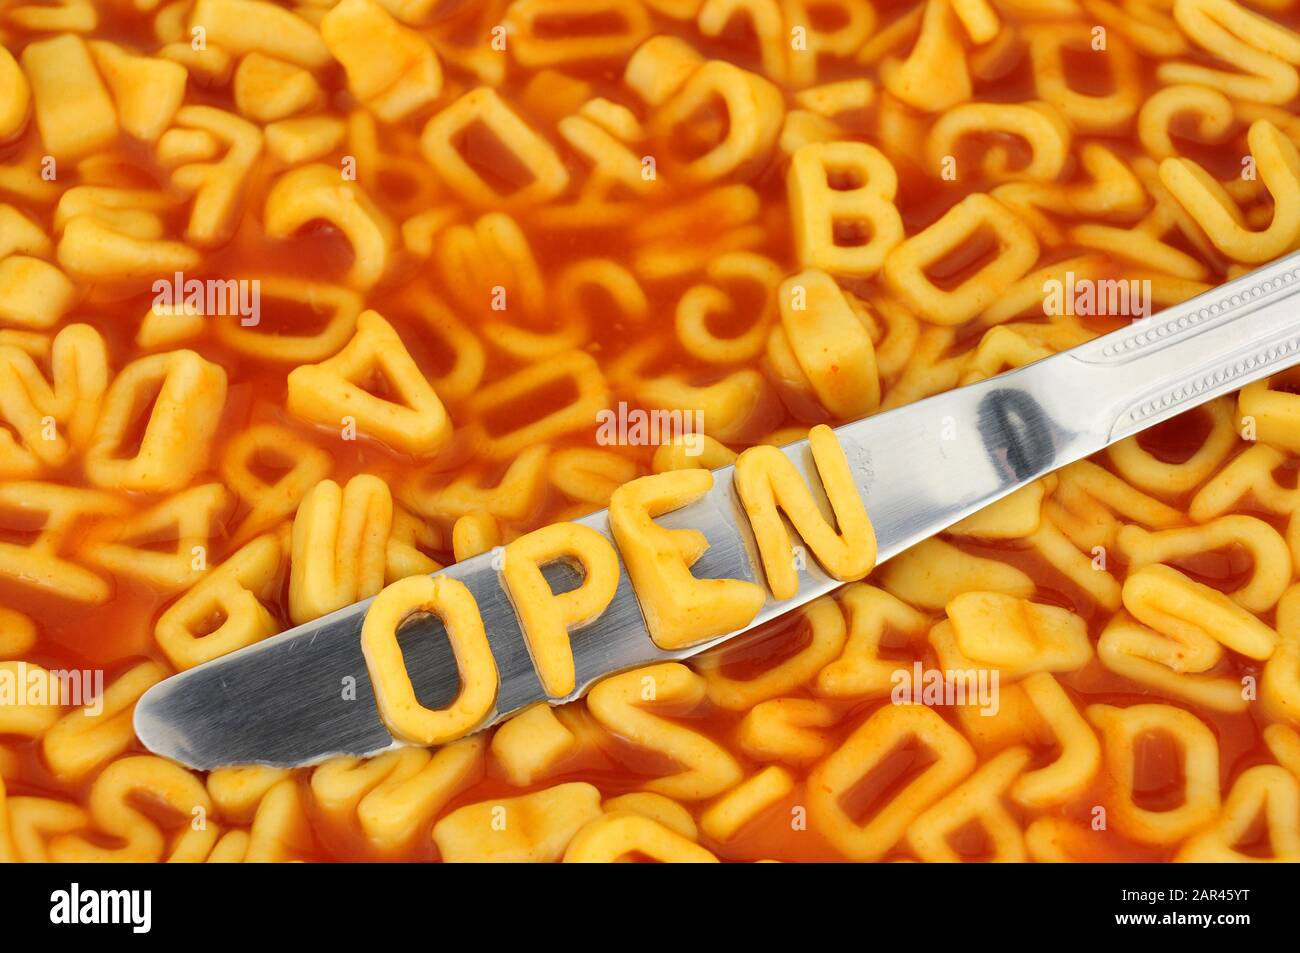 Alphabet spaghetti spelling open with random letters in tomato sauce background Stock Photo